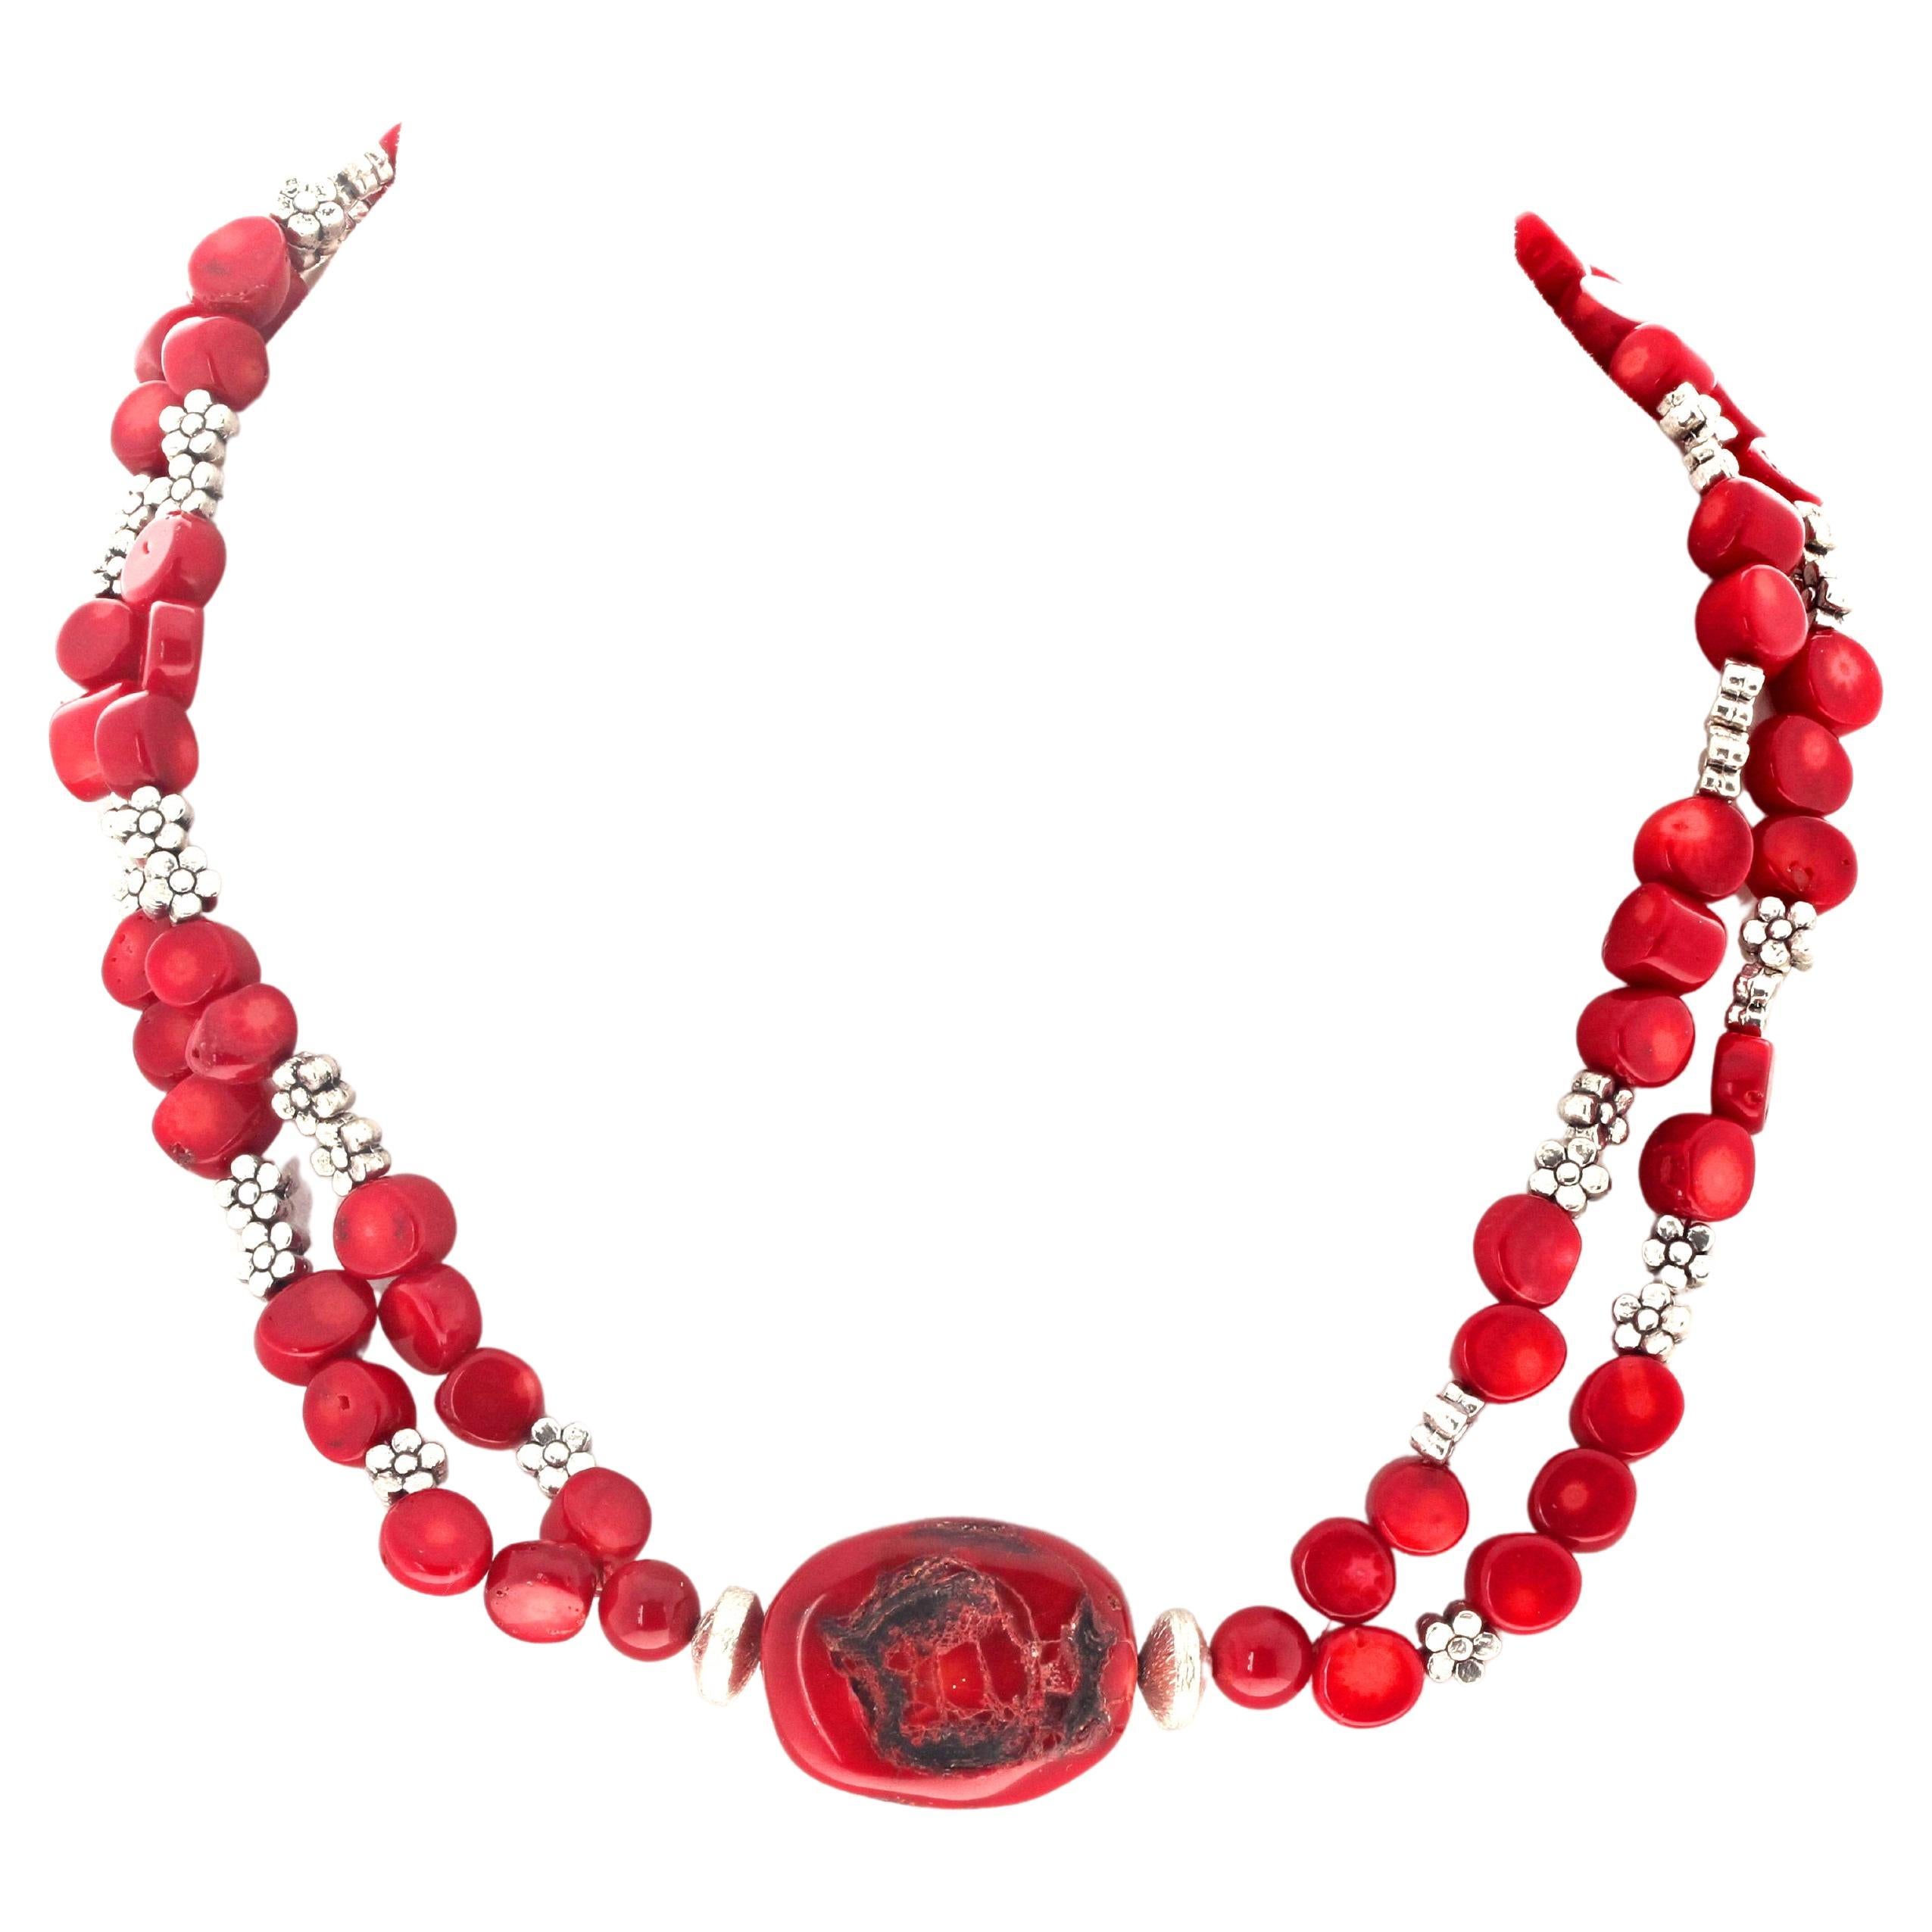 AJD Natural Artistic Red Coral & Silver Flowers 15 1/2" Double Strand Necklace (Collier double) en vente